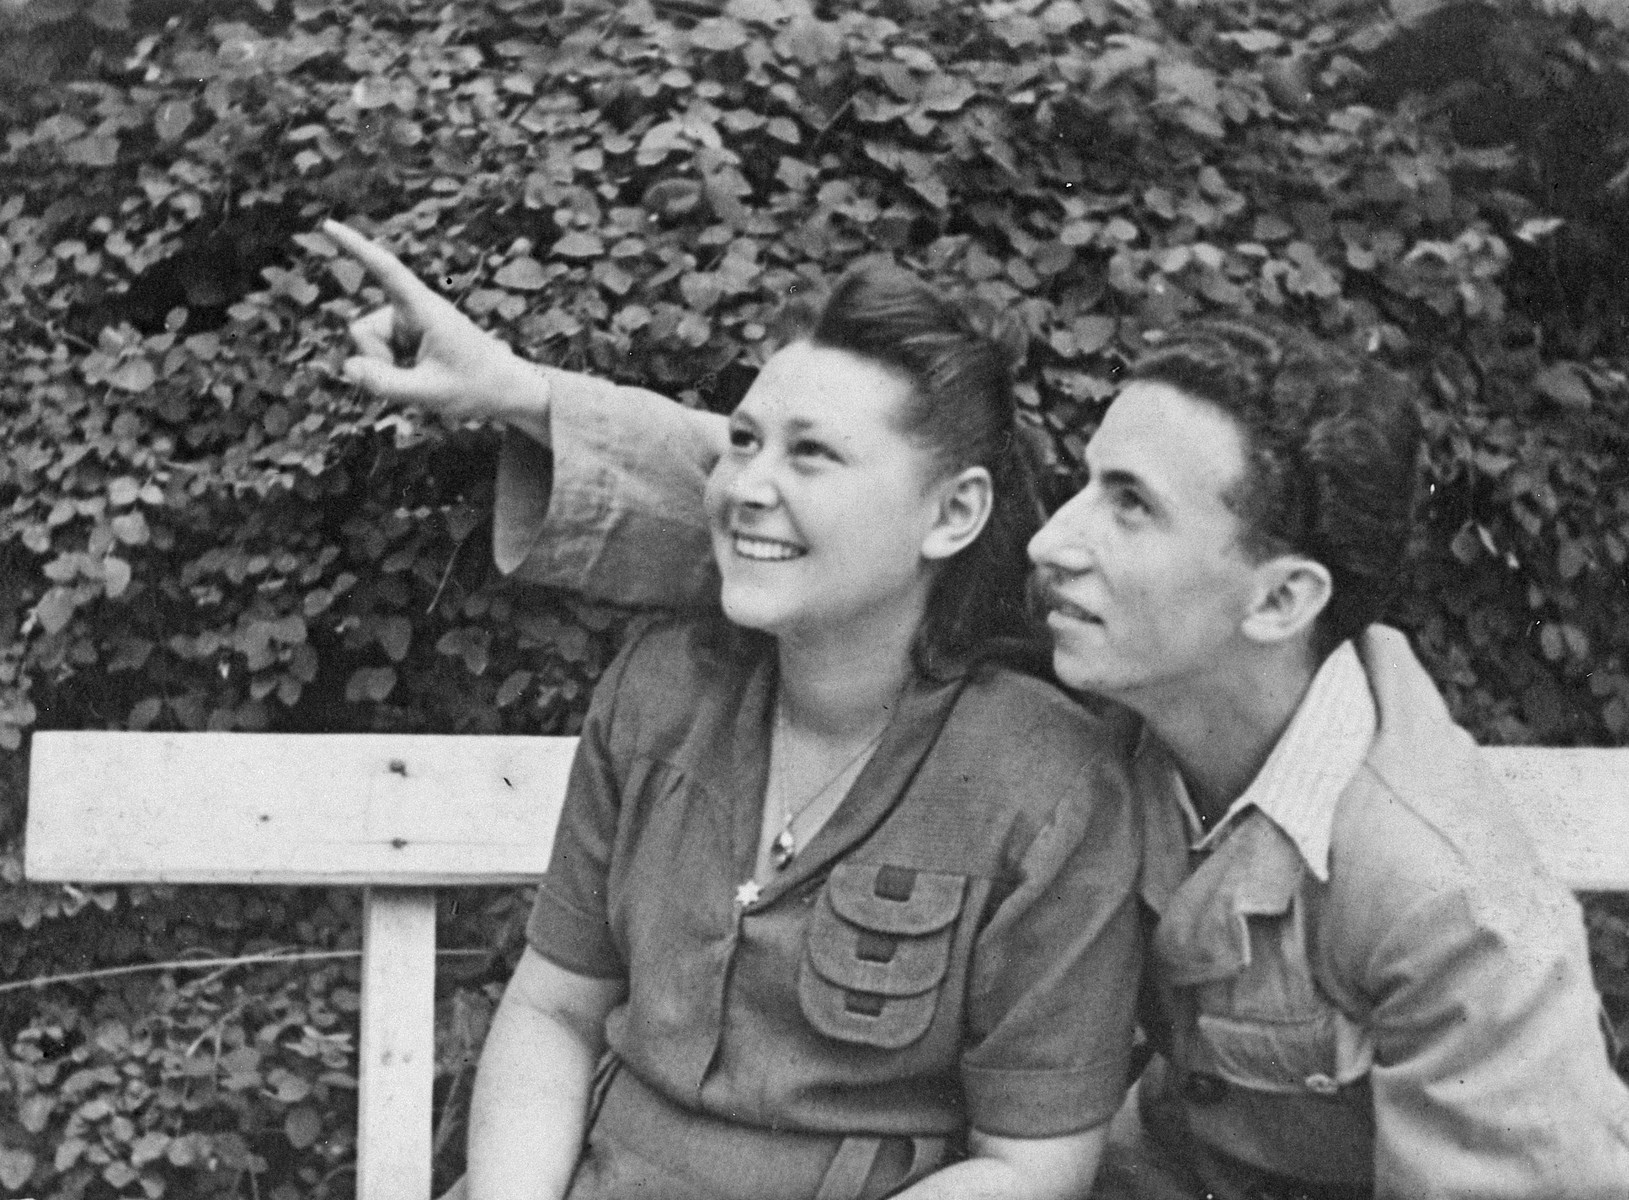 A young couple sits on a bench in the Leipheim DP camp and looks up at something in the sky.

Pictured are Rachel and Lolek Grynfeld.